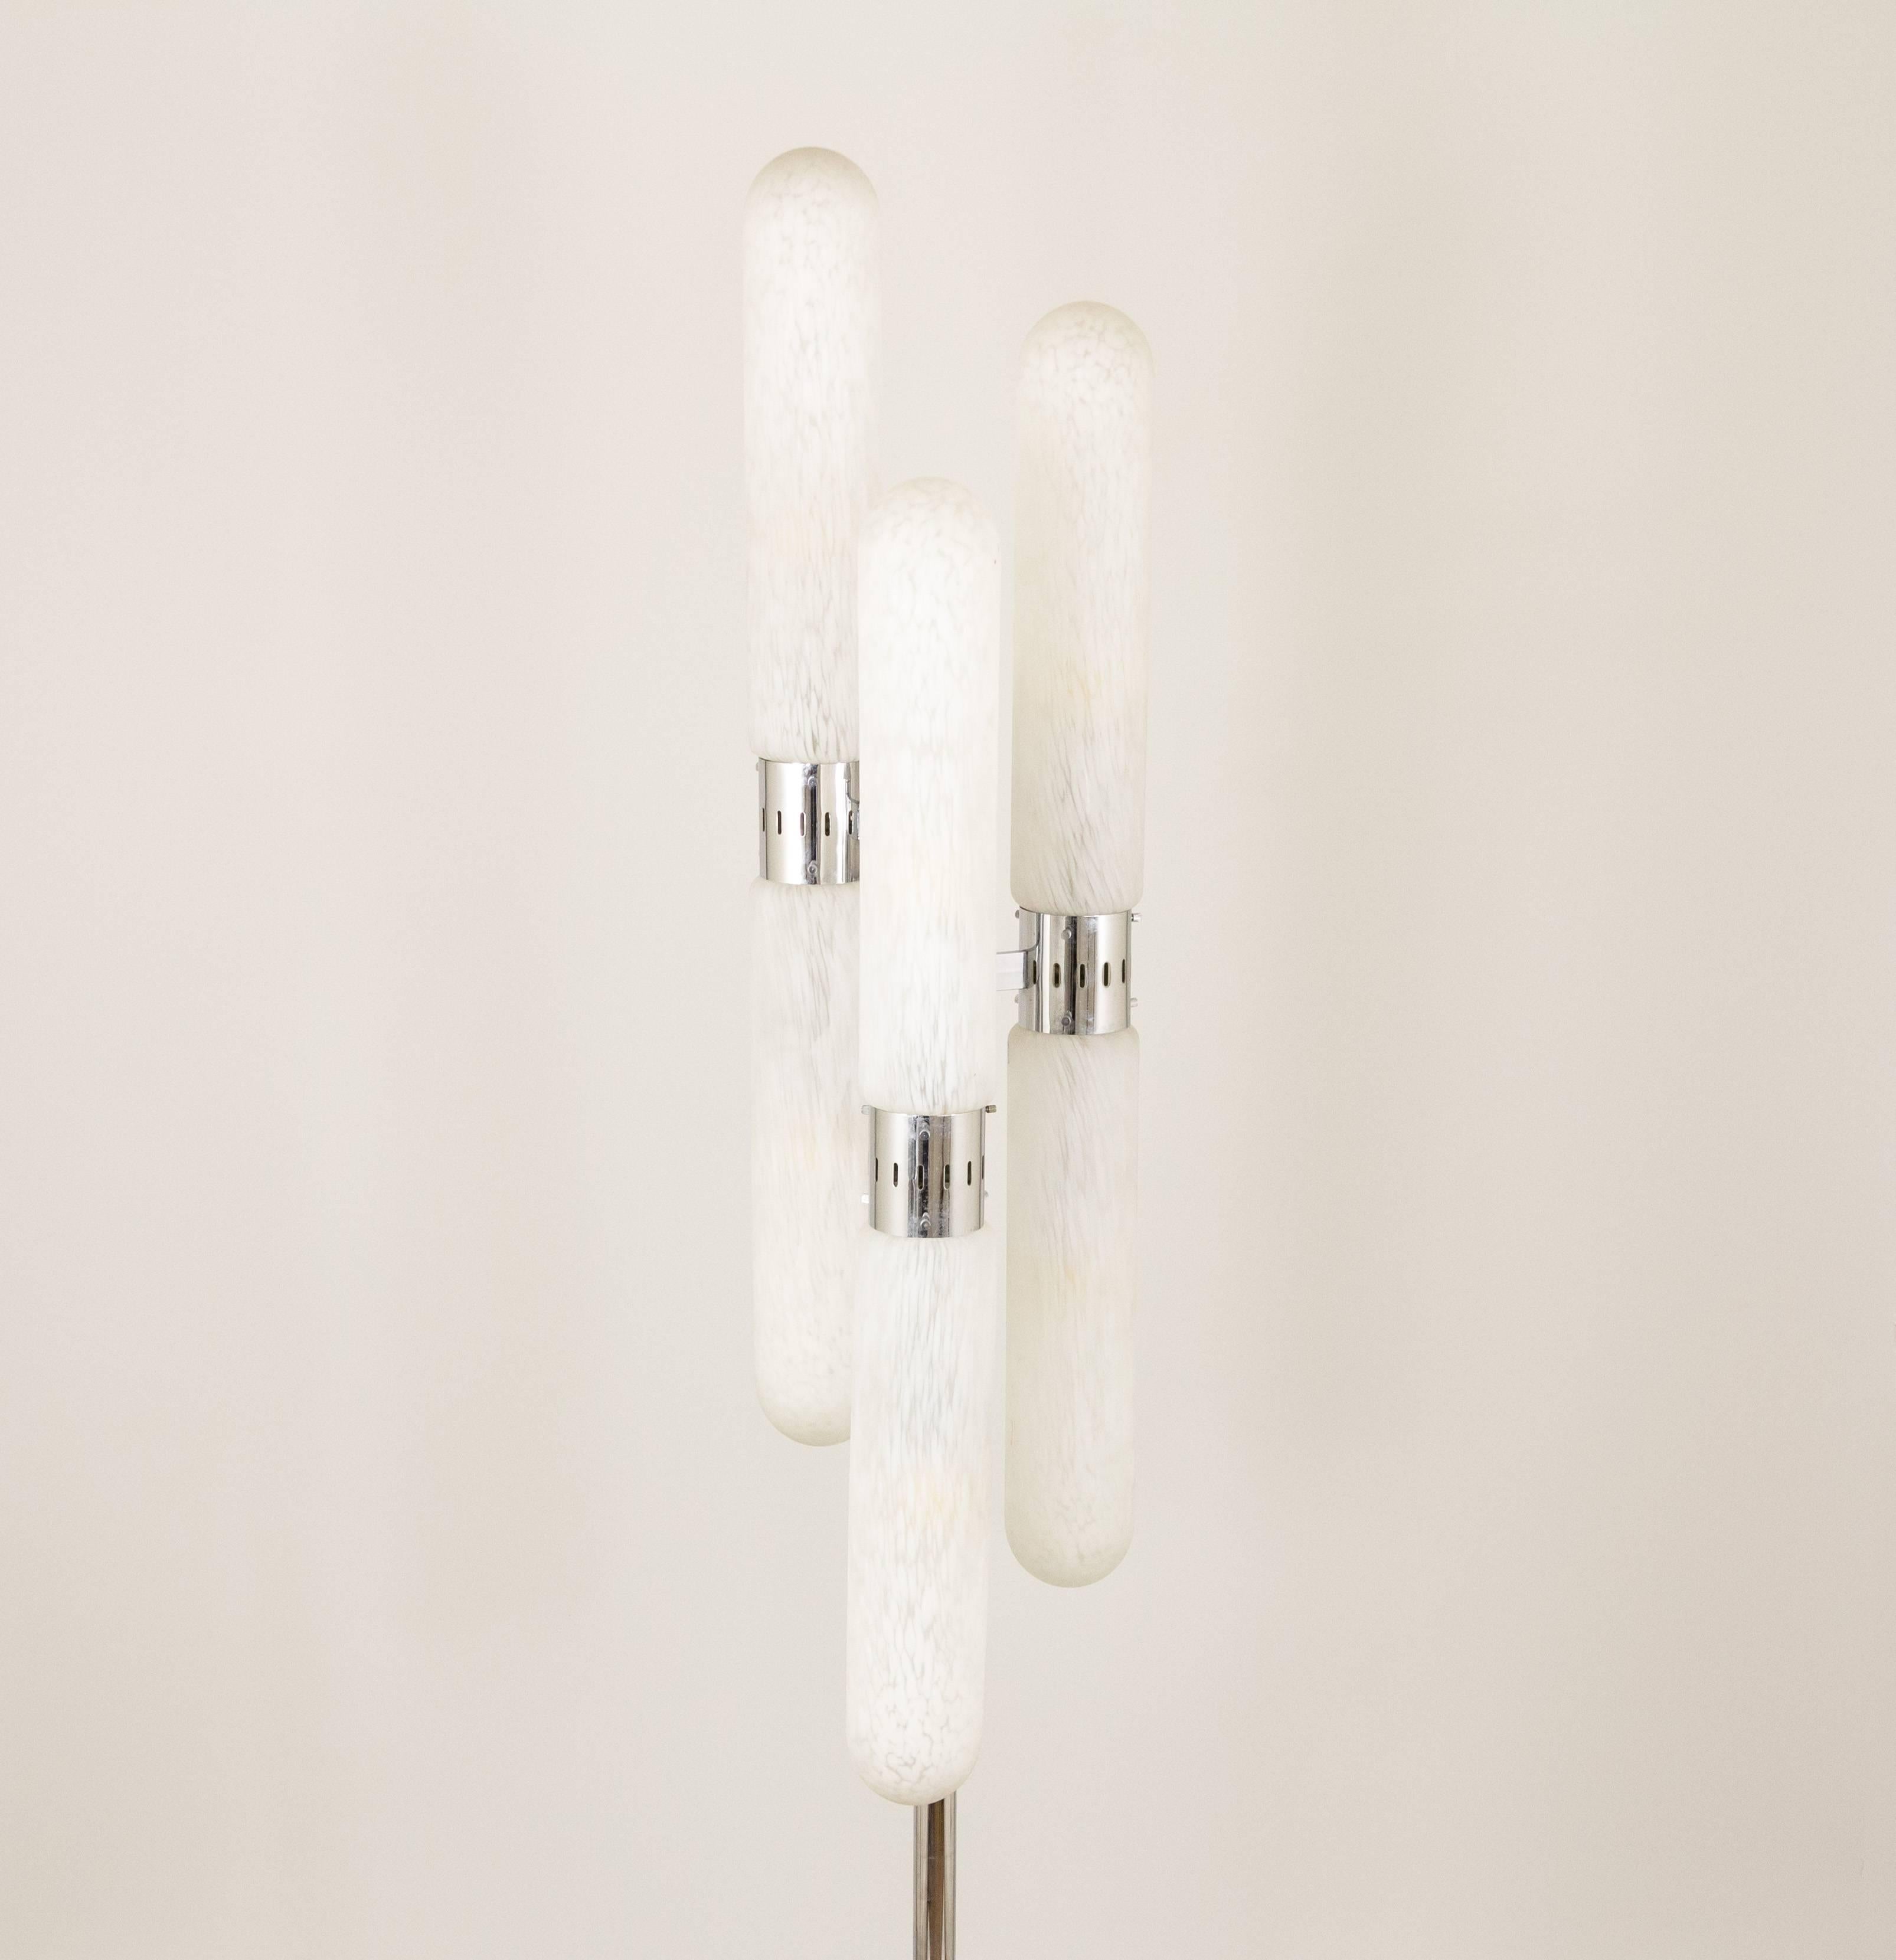 An exceptional floor lamp by Carlo Nason for renowned Murano glassmakers AV Mazzega.

The lamp consists of six handblown glass tubes, which are arranged at different heights. The glass varies from milk white to transparent which gives an extra